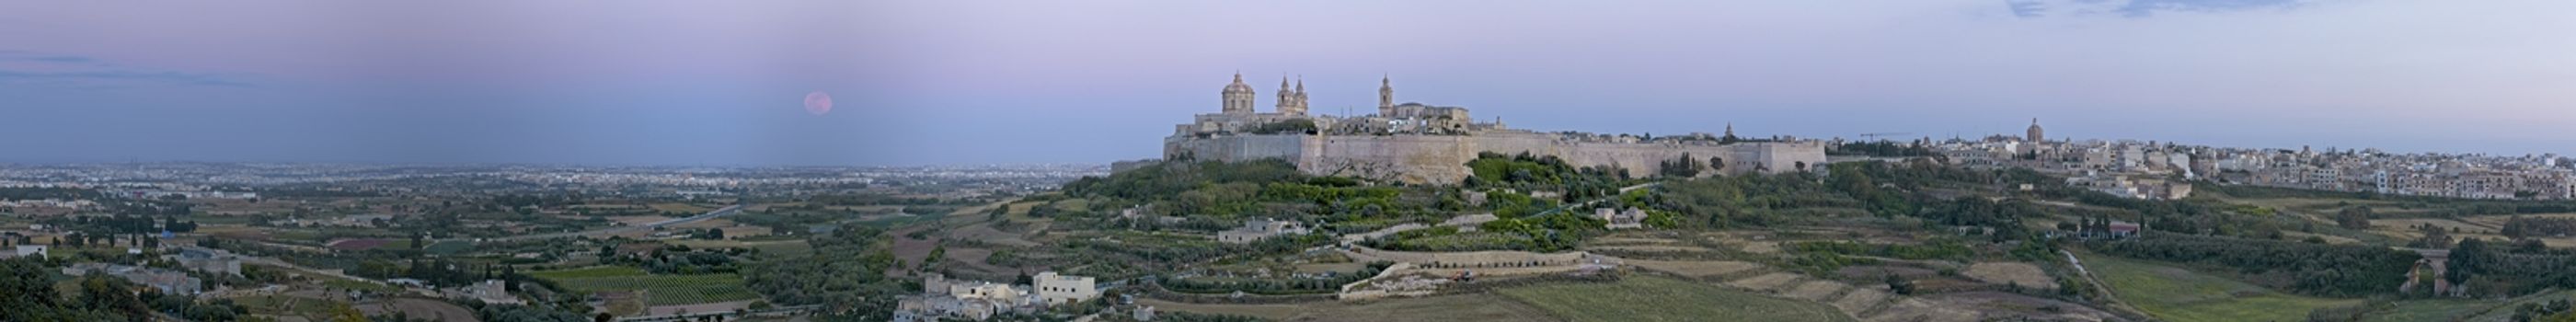 A super Moon rises over a panoramic view of the medieval city of Mdina and its surrounding countryside in Malta